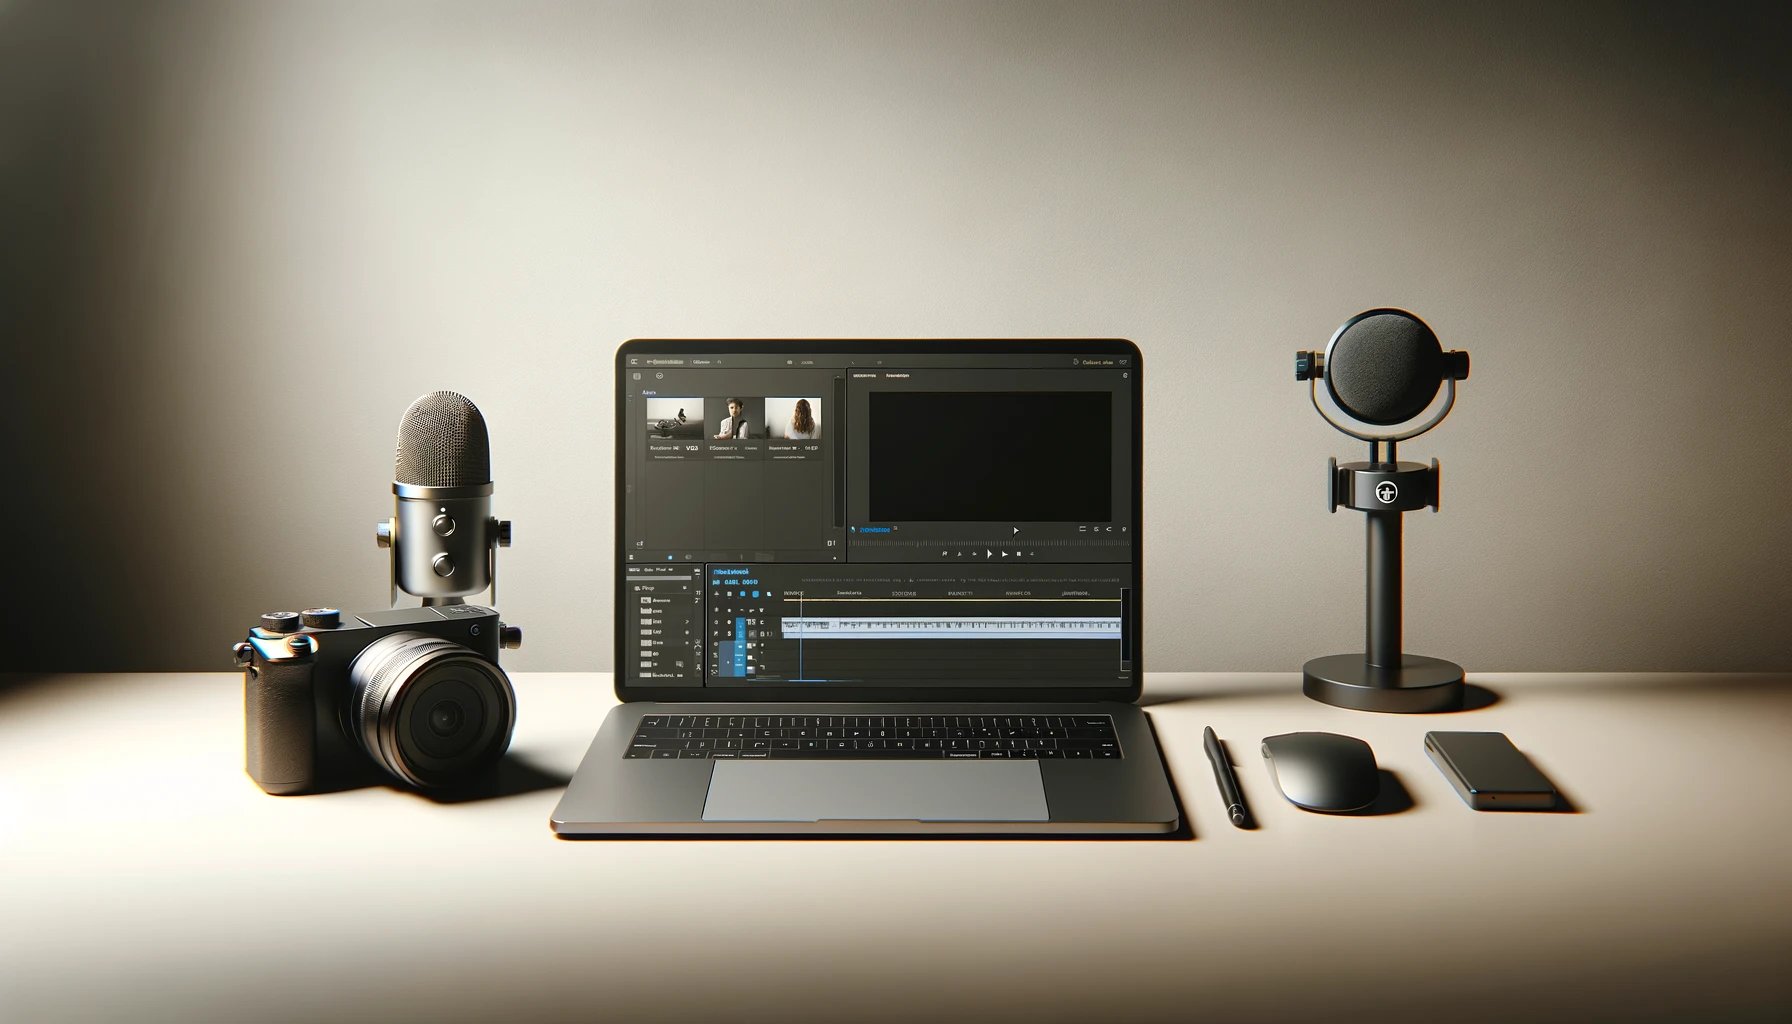 DALL·E 2024-02-06 23.56.36 - A minimal and clean workspace for video marketing, featuring a modern laptop with video editing software on screen. Beside the laptop, theres a compa